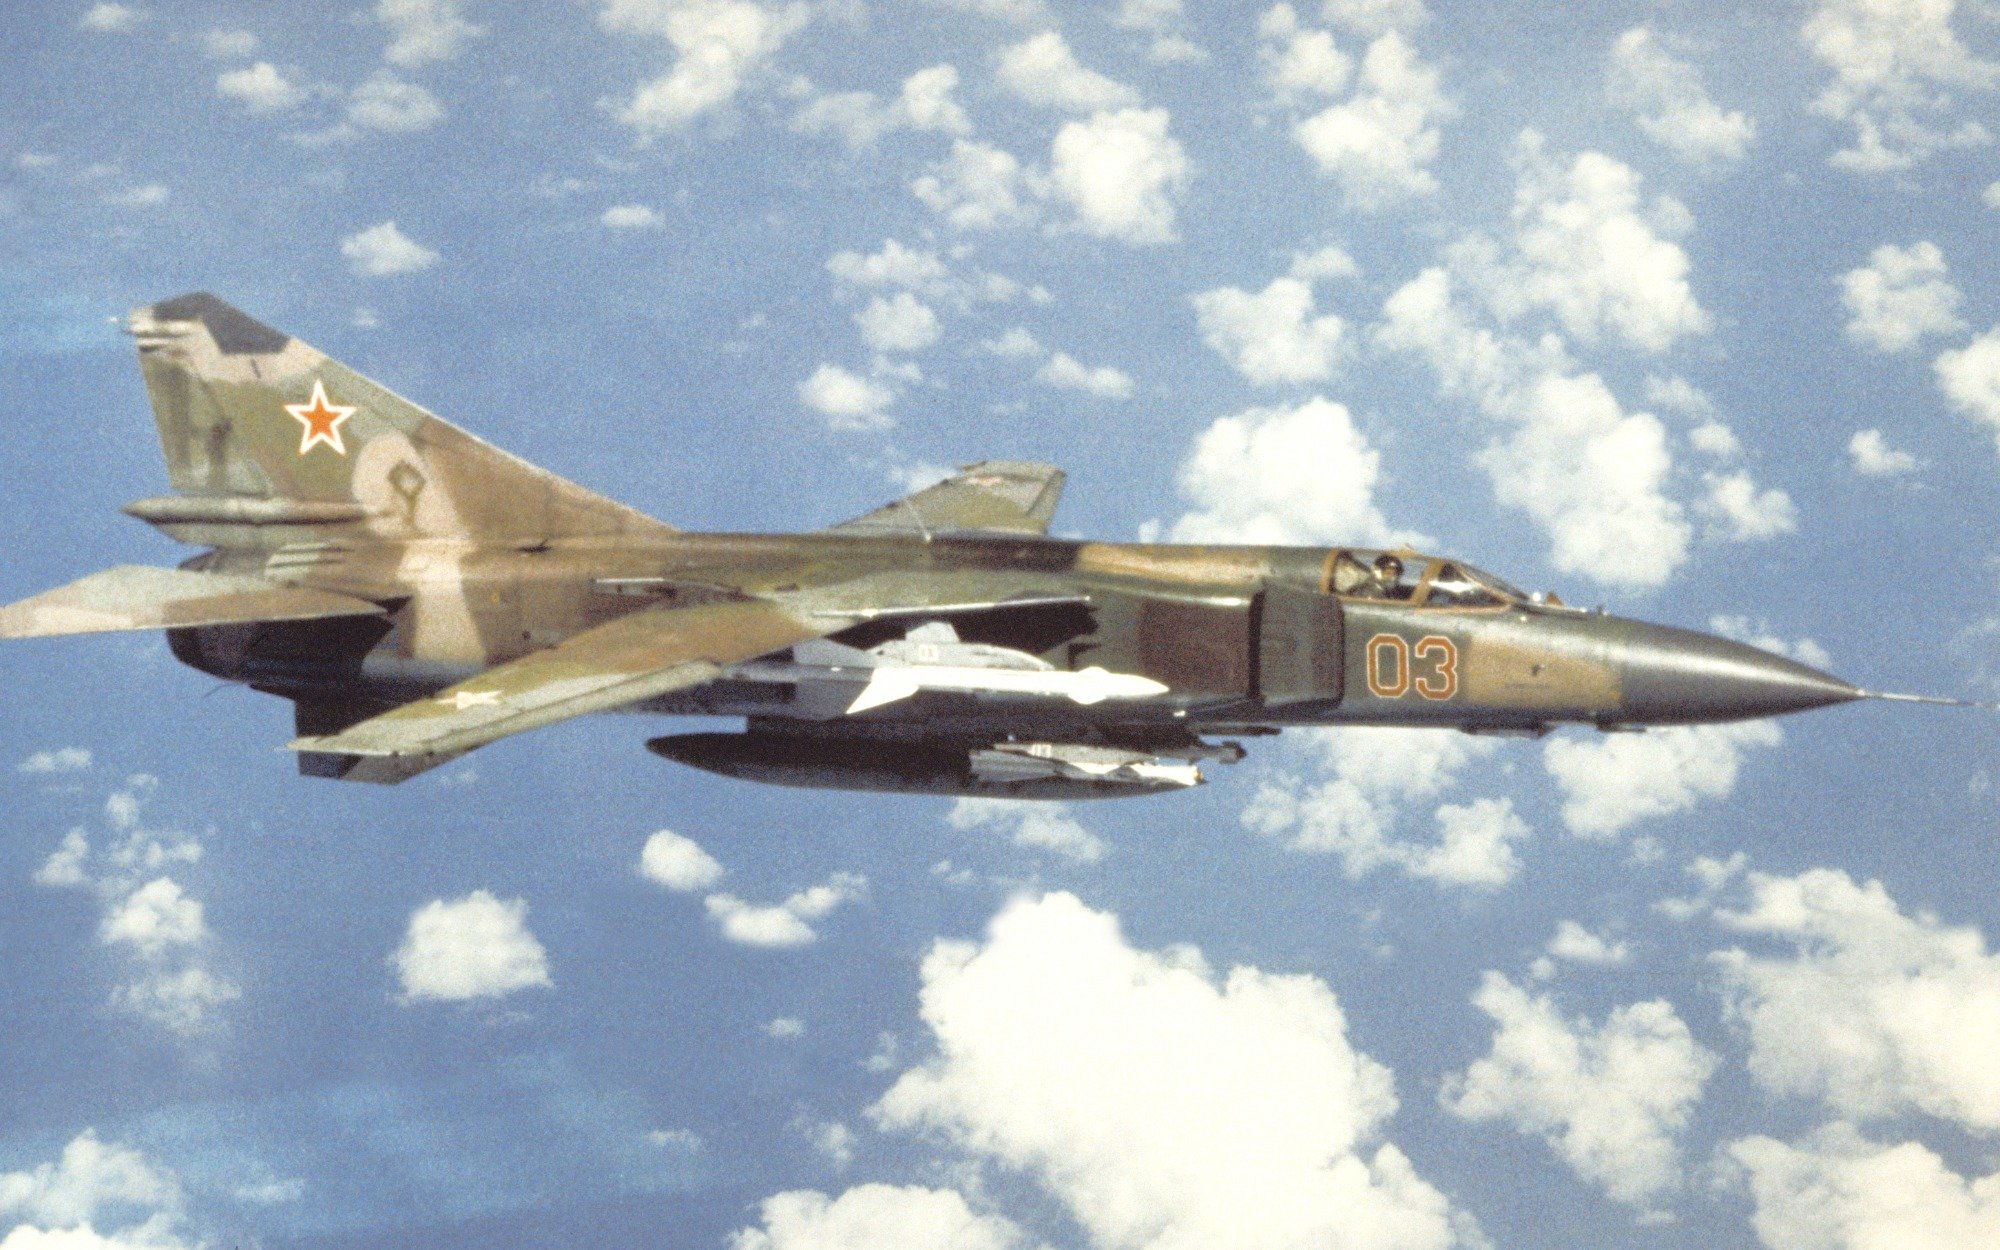 MiG-23 Fighter Has Something the U.S. Air Force Can't Match (In Awfulness)